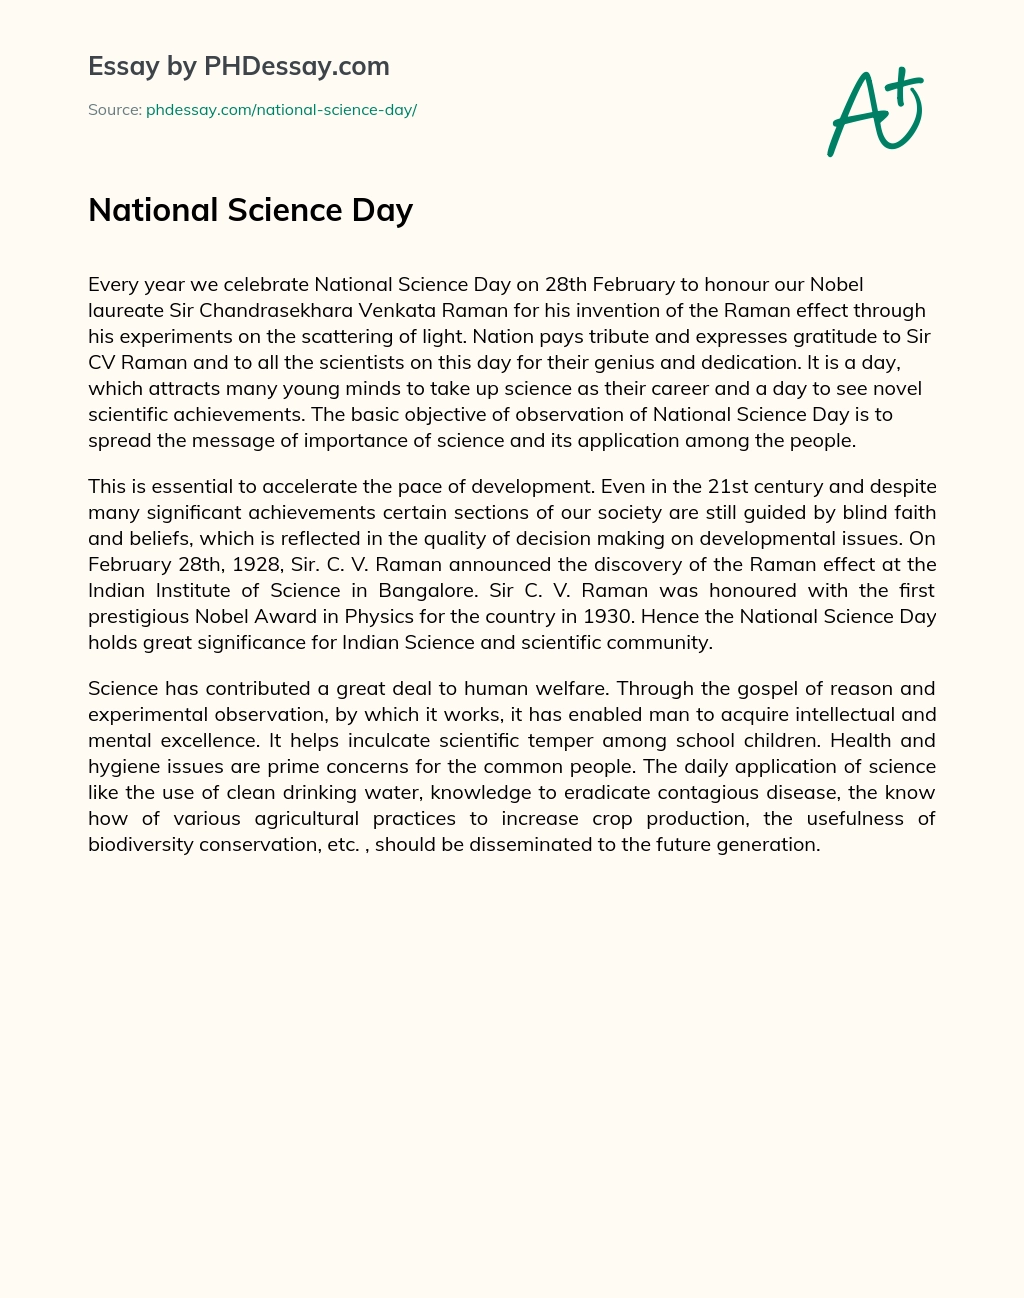 National Science Day essay